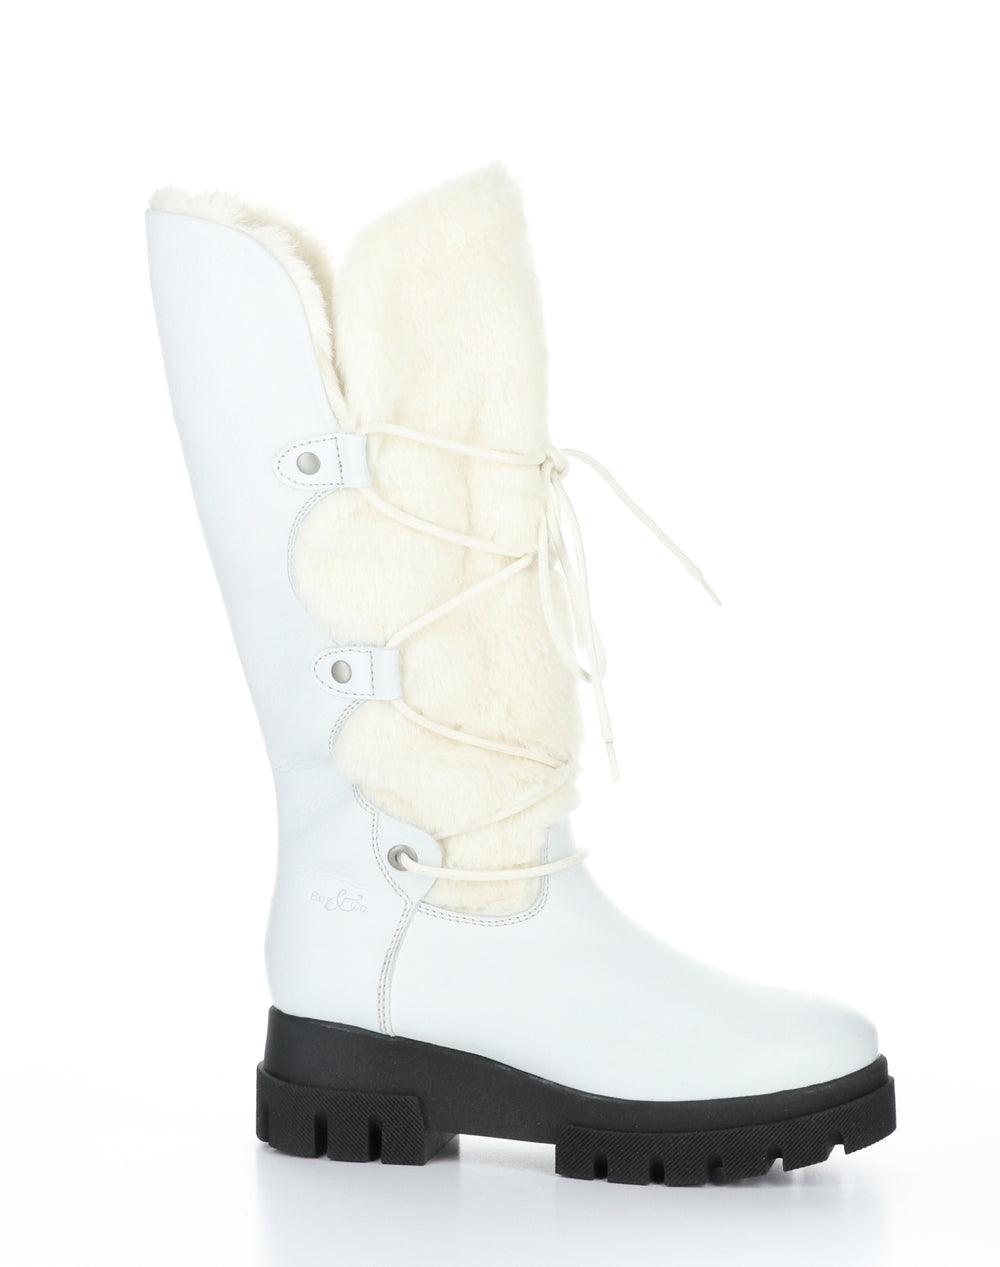 CABAL White Zip Up Boots